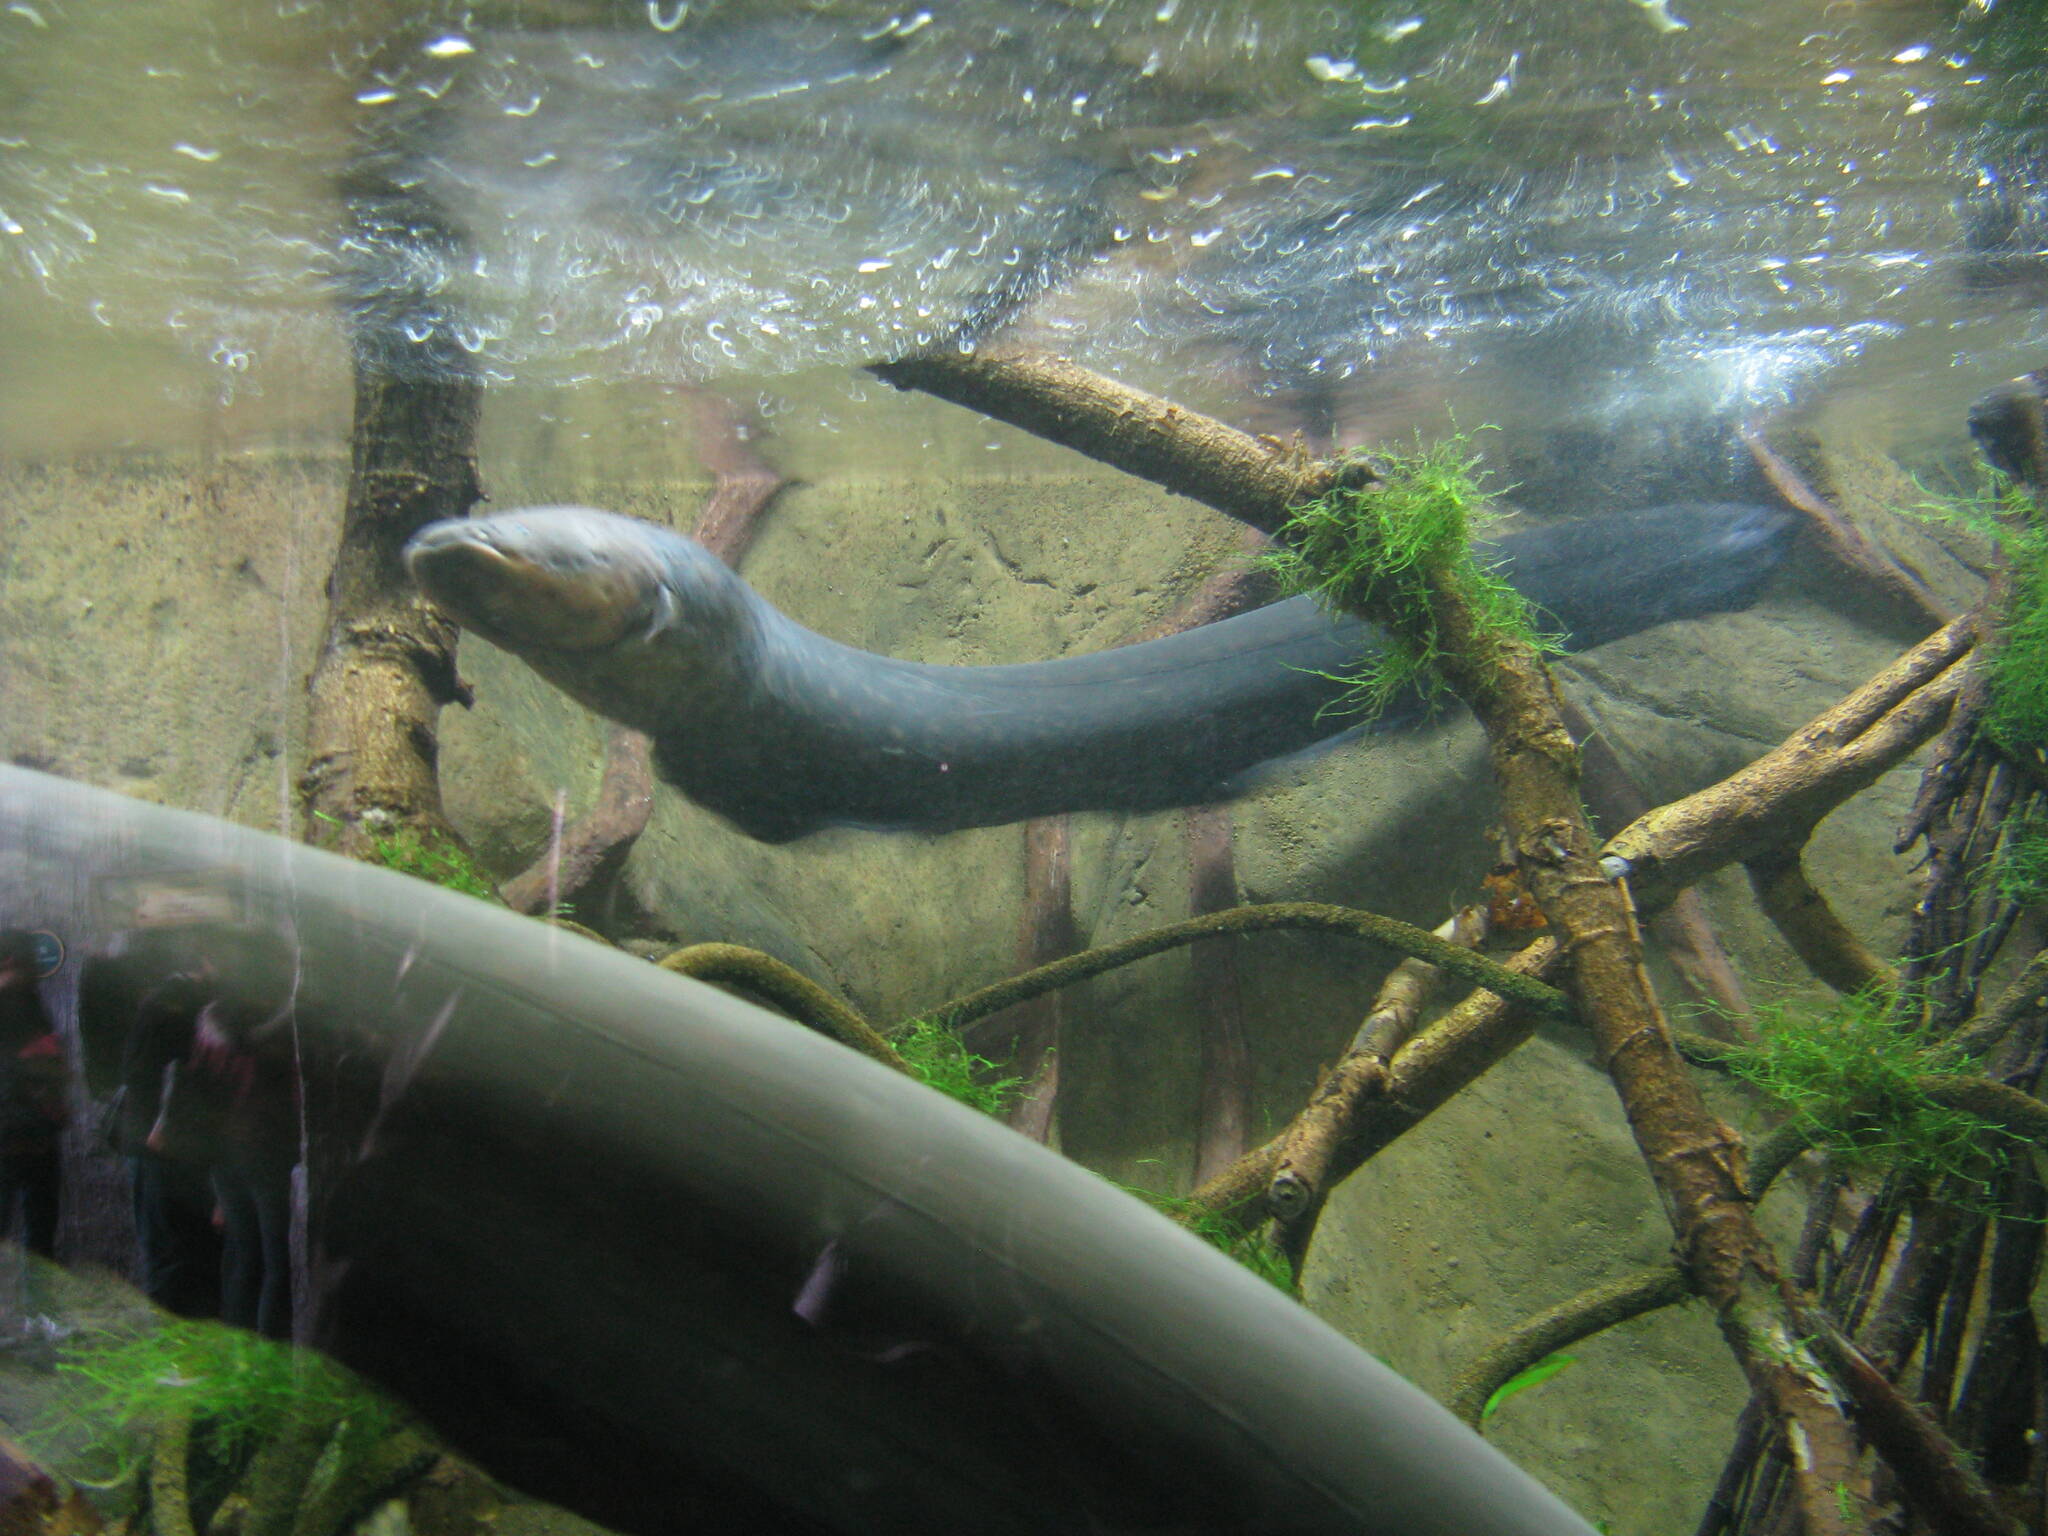 Electric eels swim fast inside a tank in this photo available under a Creative Commons license. (Shankar S. / Flickr)